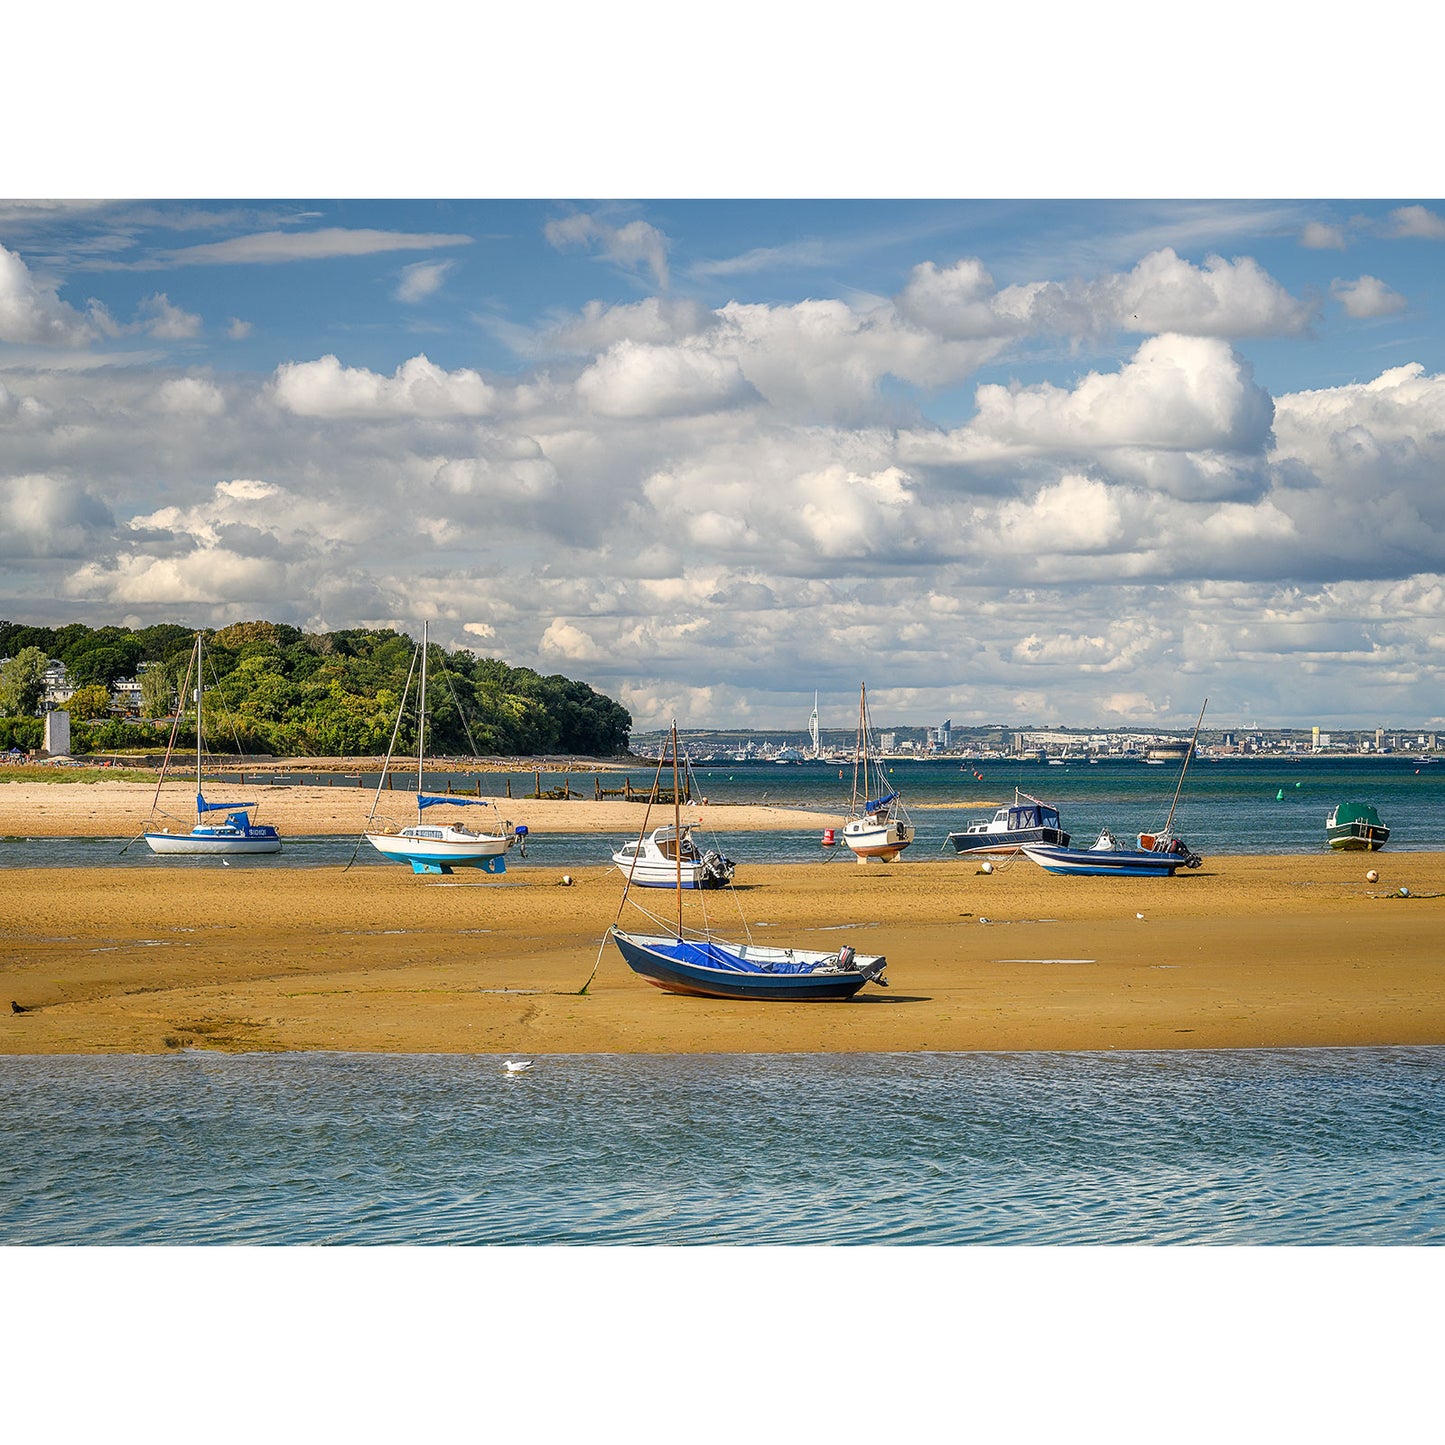 A serene low-tide scene at Bembridge Harbour on the Isle of Wight with boats on a sandy shore under a partly cloudy sky, captured by Available Light Photography.